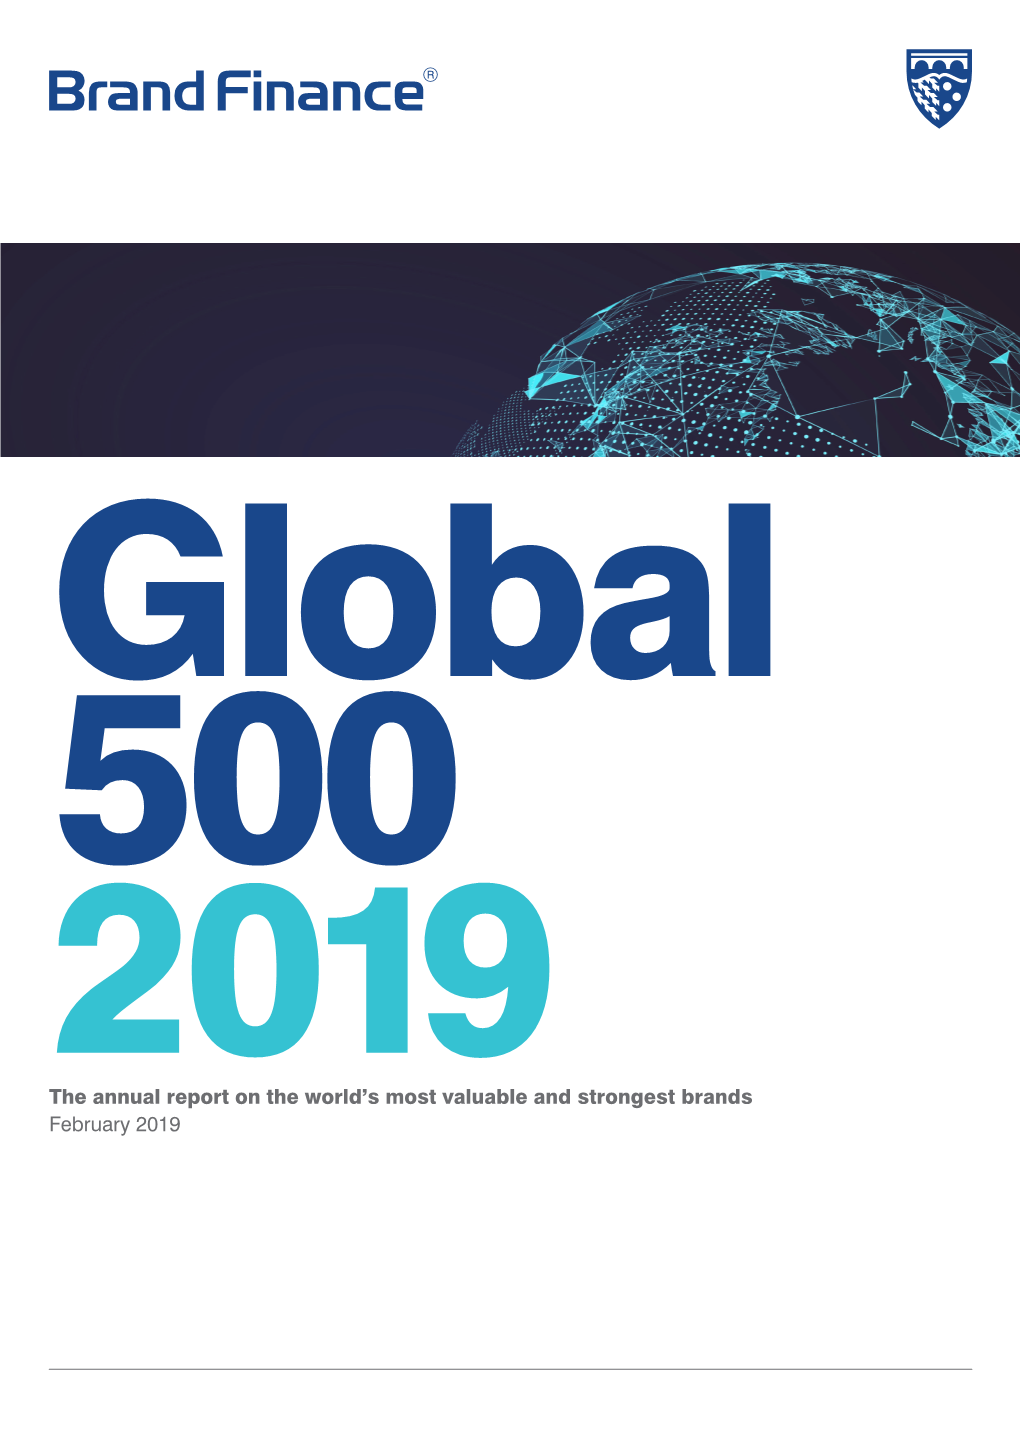 Download the 2019 Global 500 Report